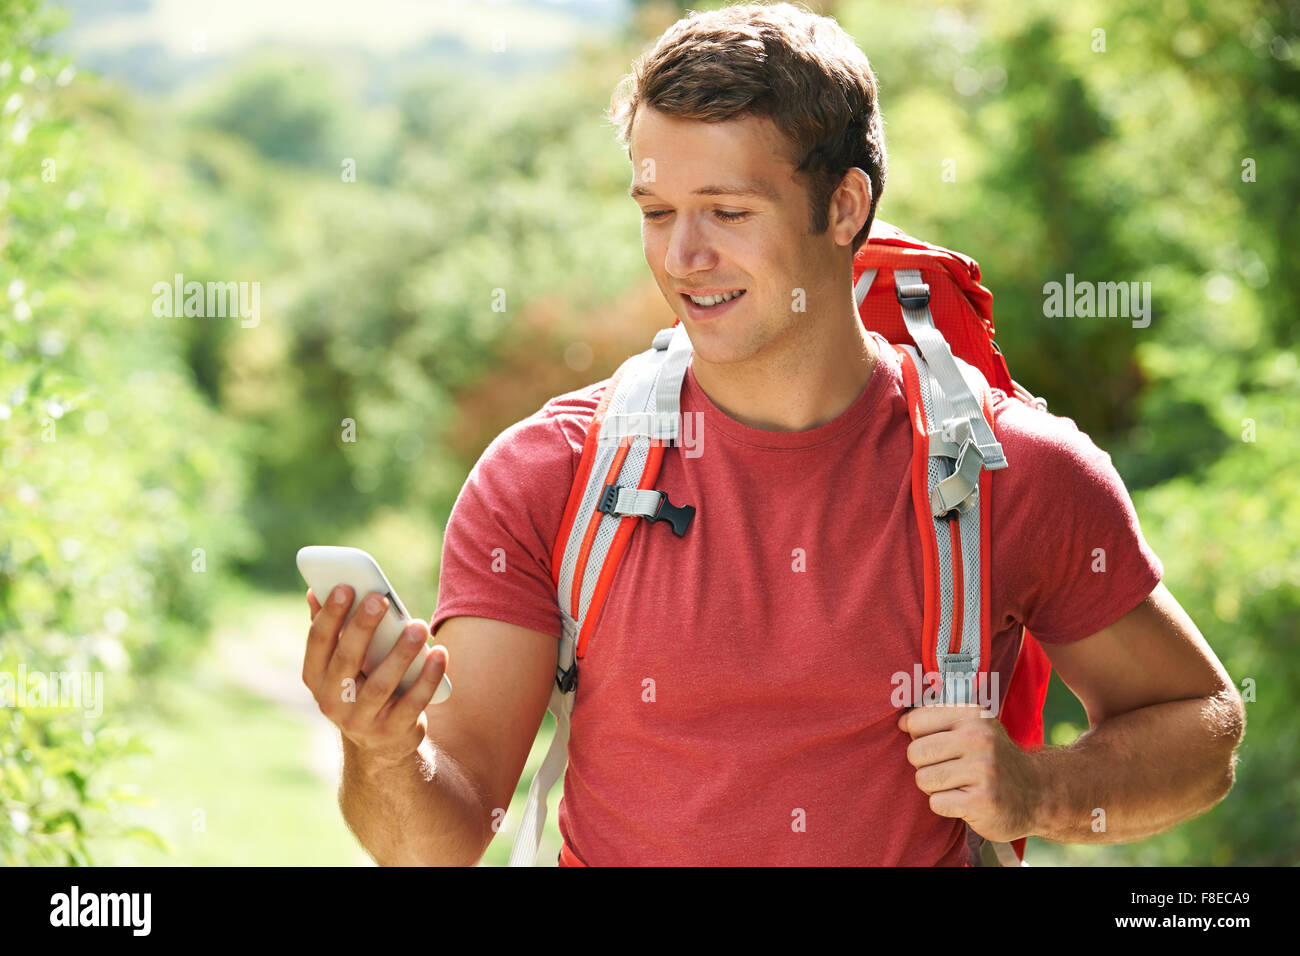 Man Checking Location With Mobile Phone On Hike Stock Photo